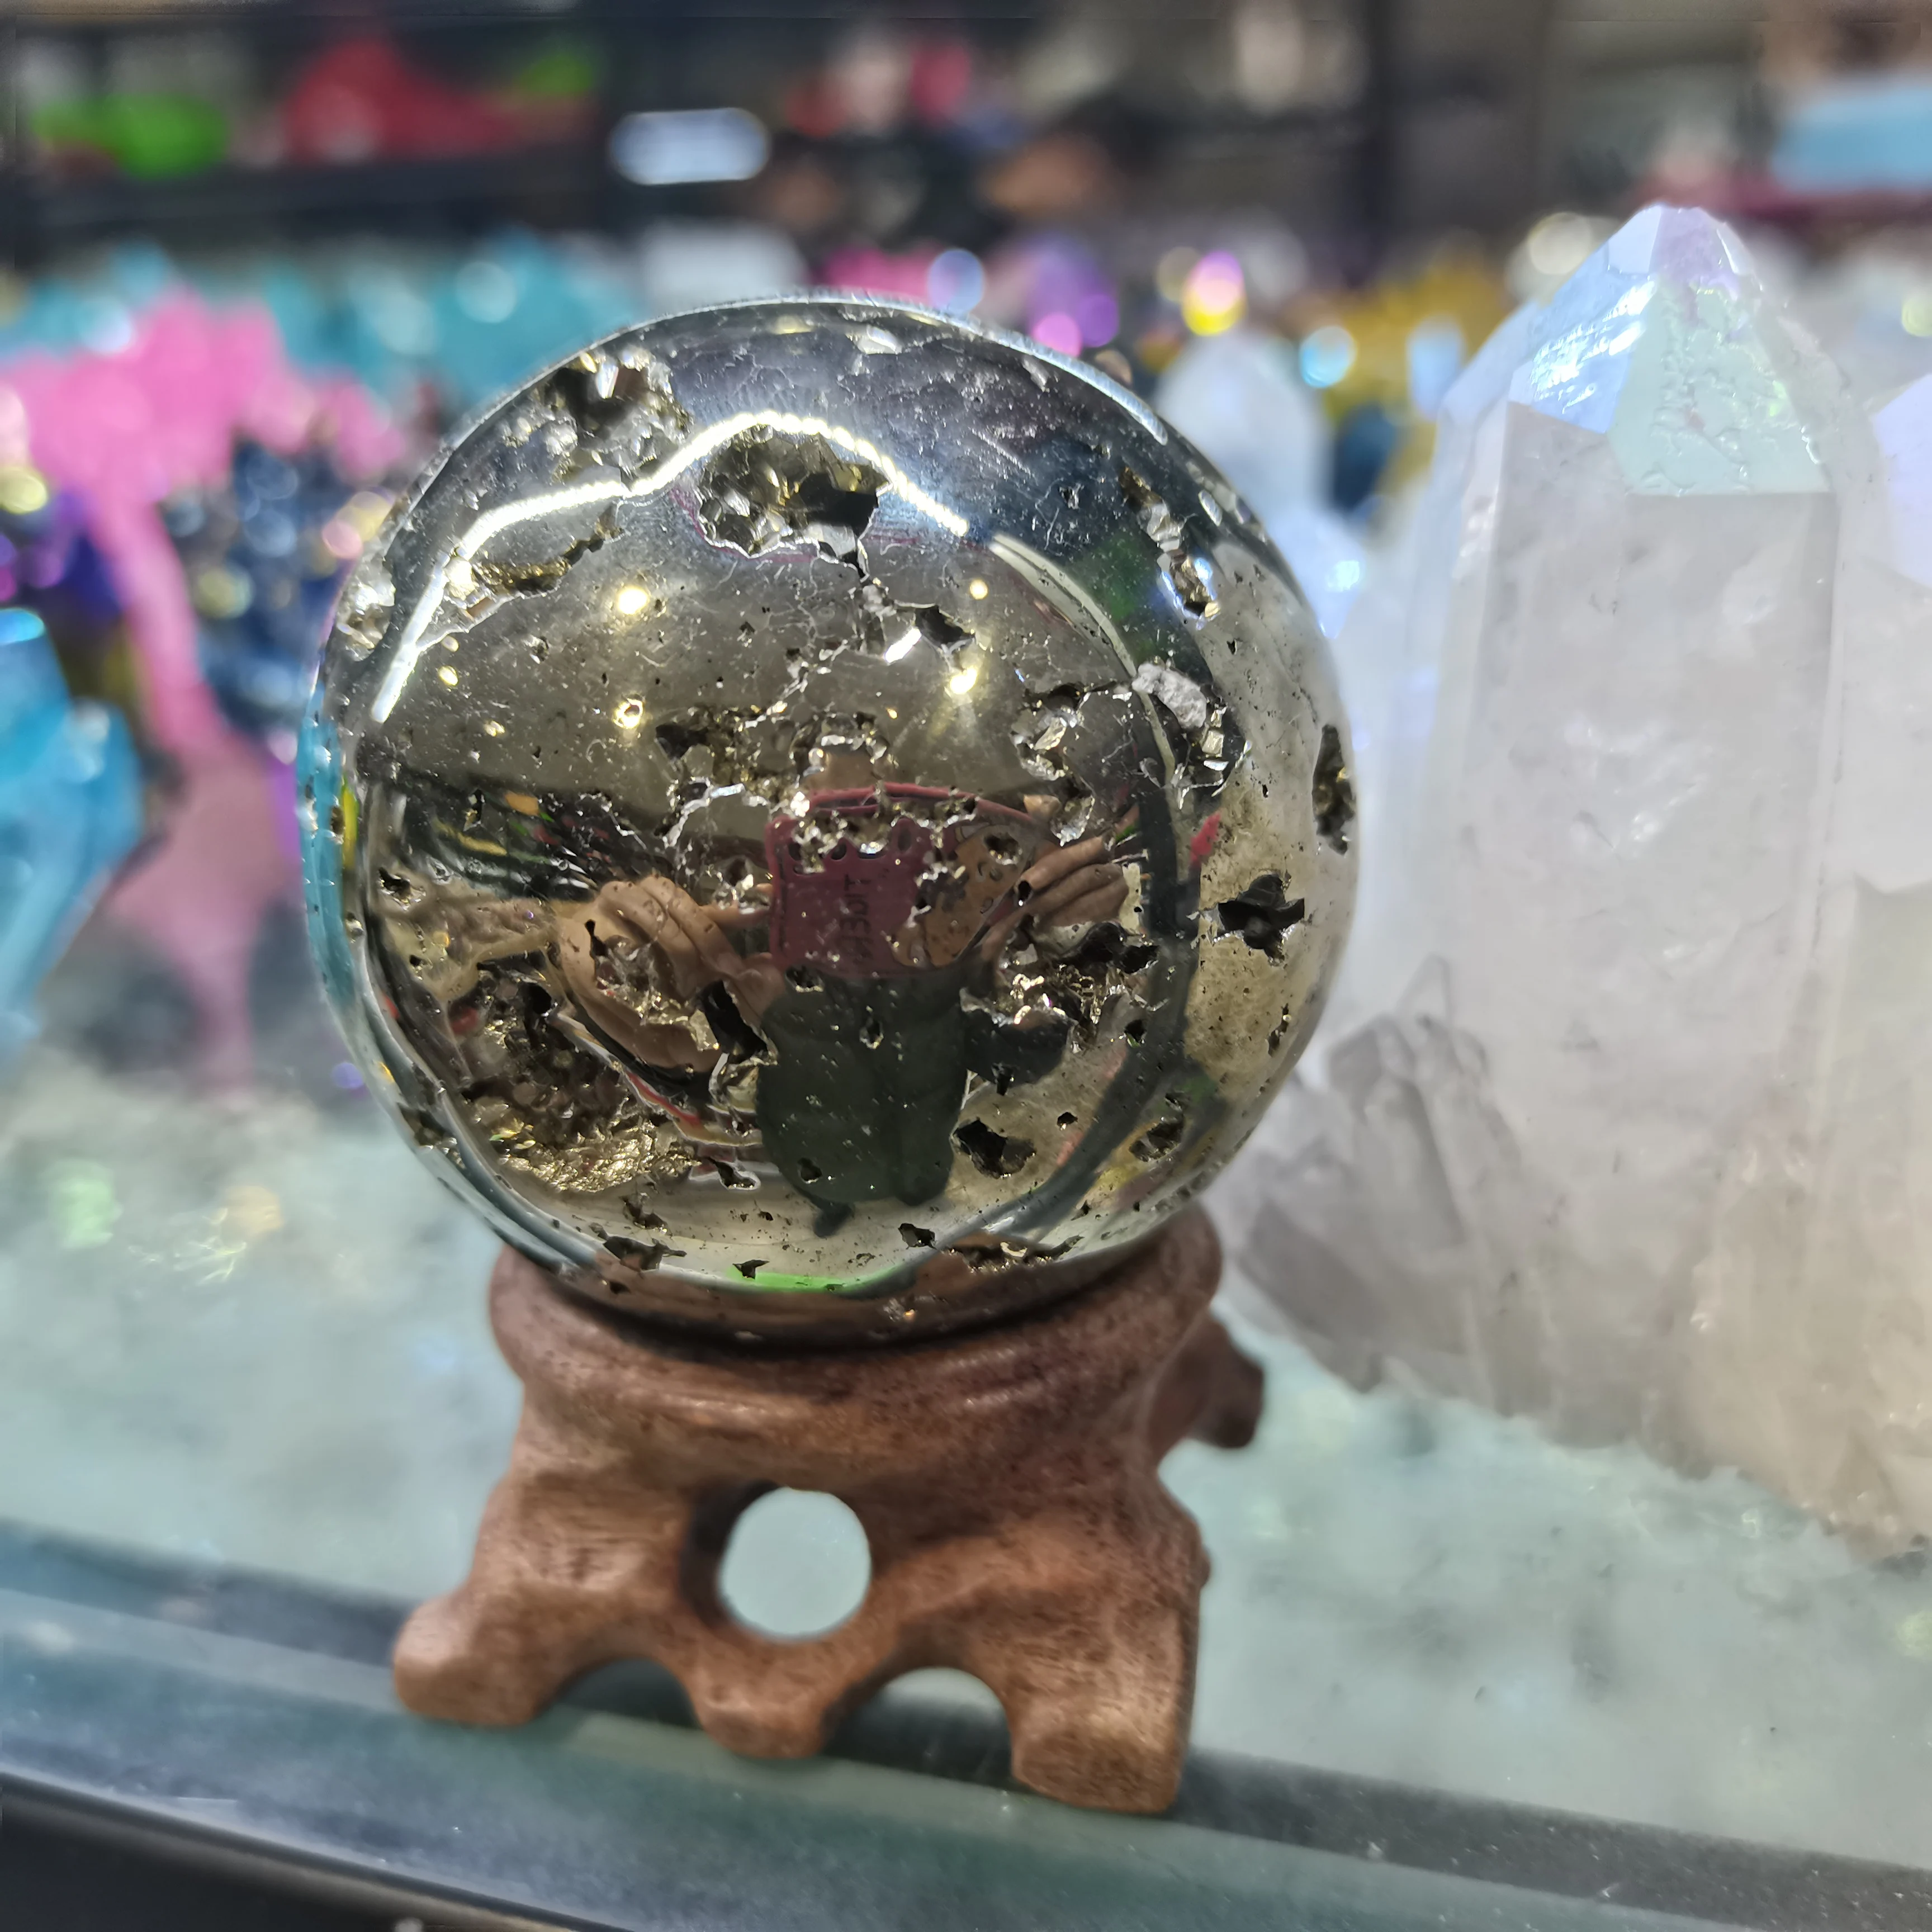 60 mm 5A+ 100% Natural chalcopyrite crystal ball ball natural stone handicraft used in feng shui collection home decoration 1pcs